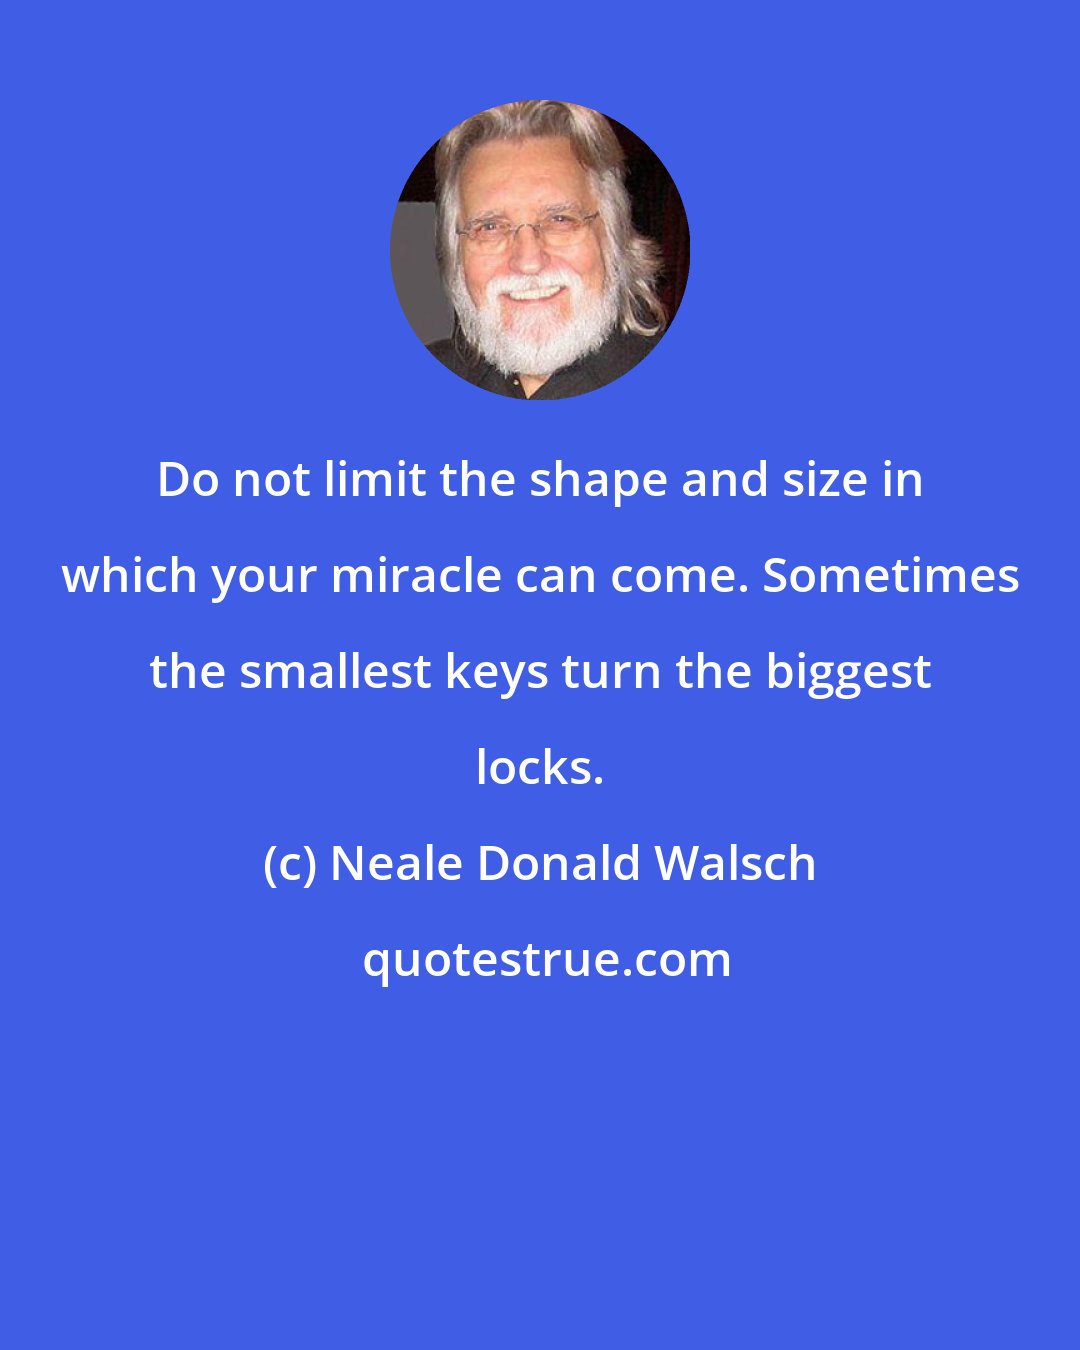 Neale Donald Walsch: Do not limit the shape and size in which your miracle can come. Sometimes the smallest keys turn the biggest locks.